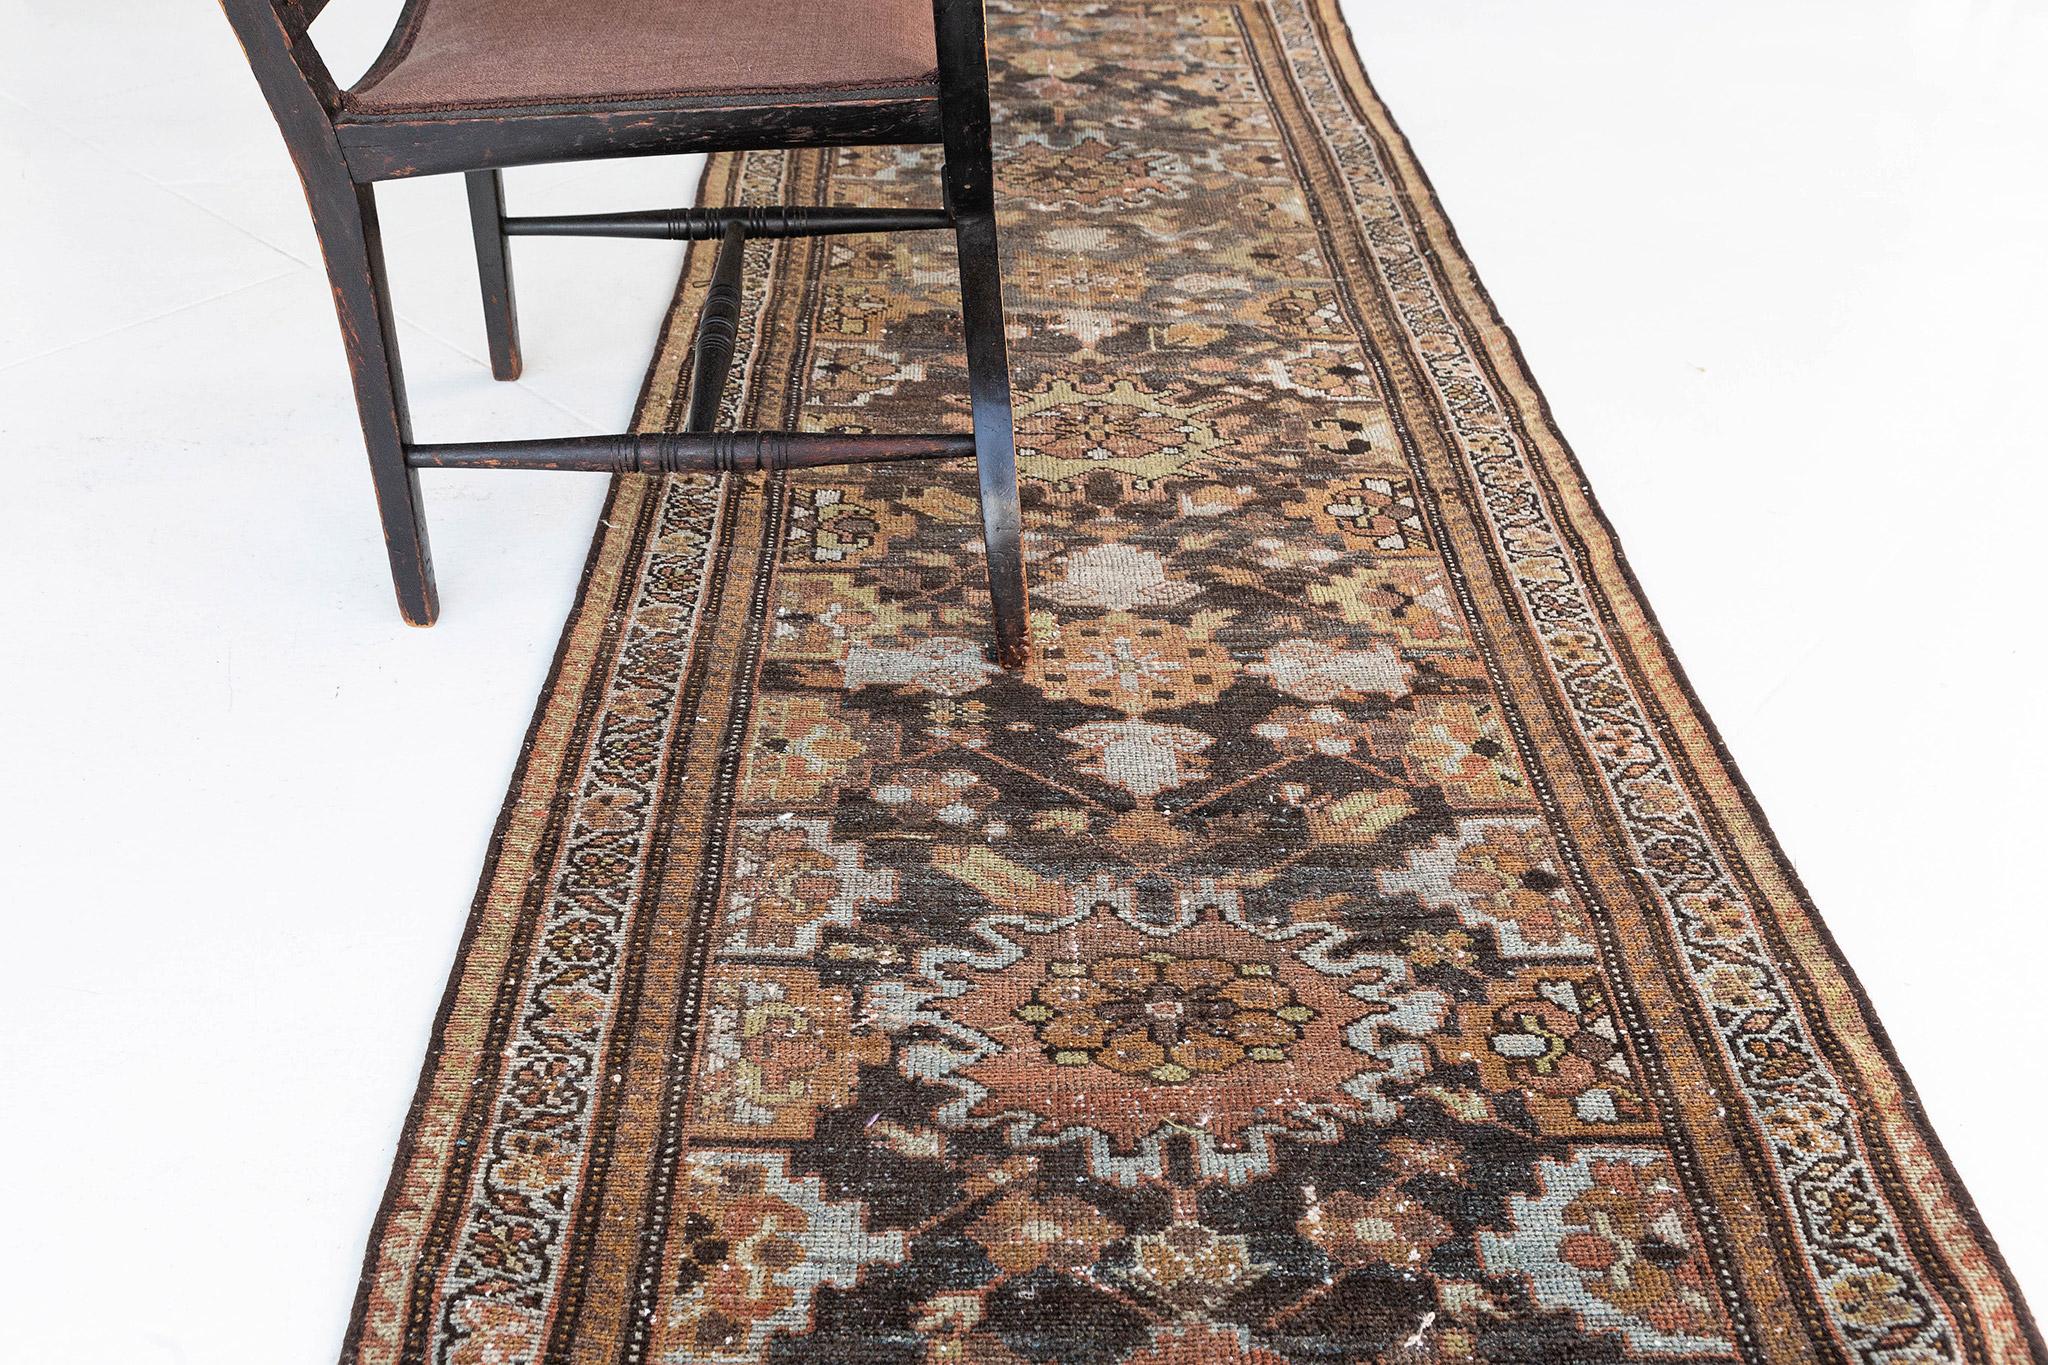 This elegant and timeless Persian Malayer rug made from vegetable dye has an intricate pattern but has clear mirrored patterns all over the design. A neutral color palette of palmettes and diamonds is perfectly toned with velvet gold accents. If you